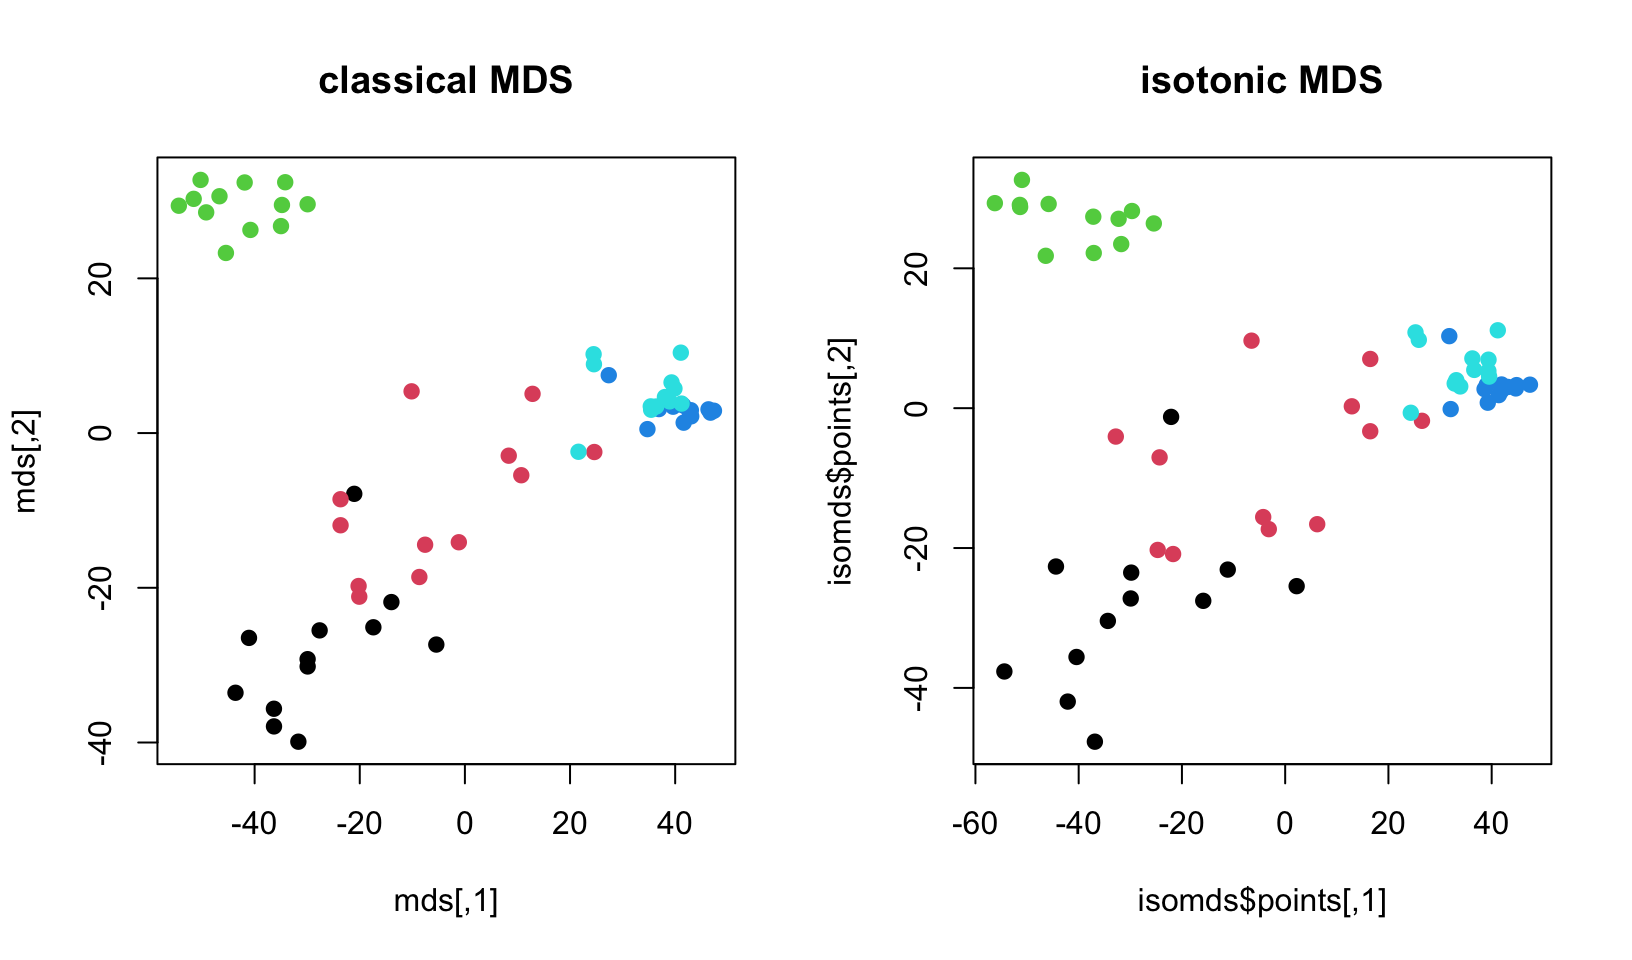 Leukemia gene expression values per patient on reduced dimensions by classical MDS and isometric MDS.